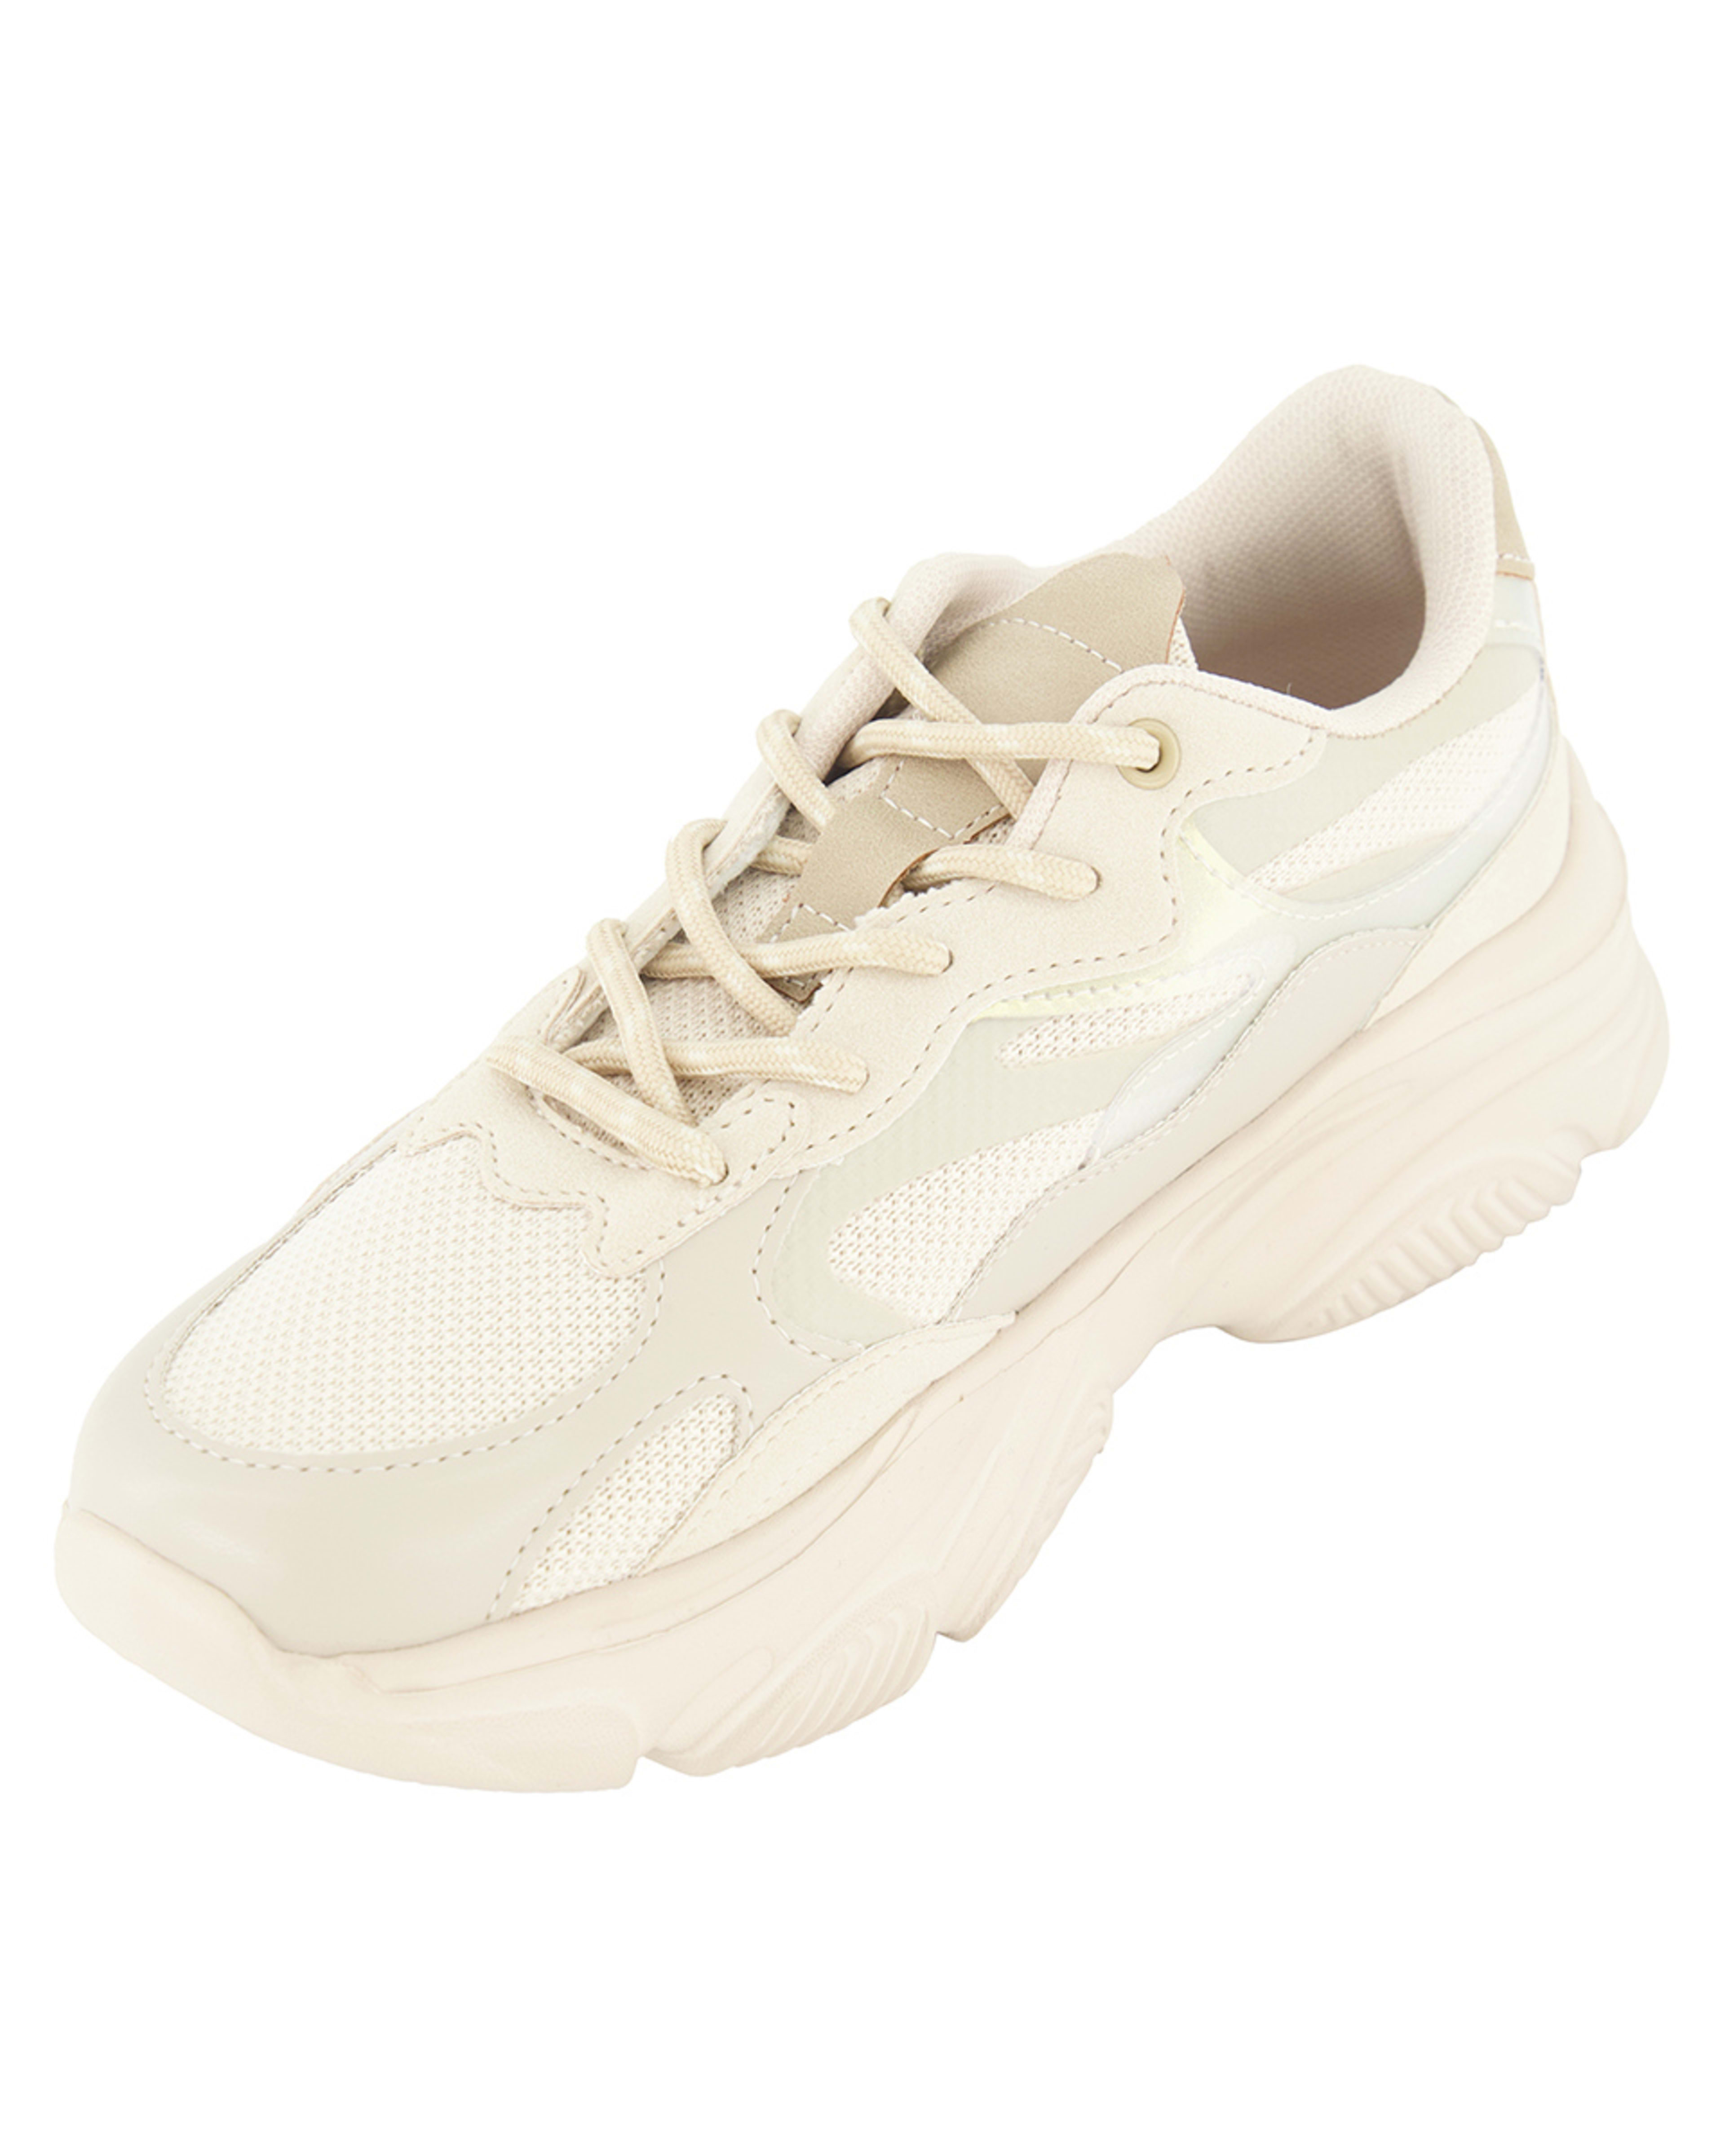 Chunky Sneakers - Kmart